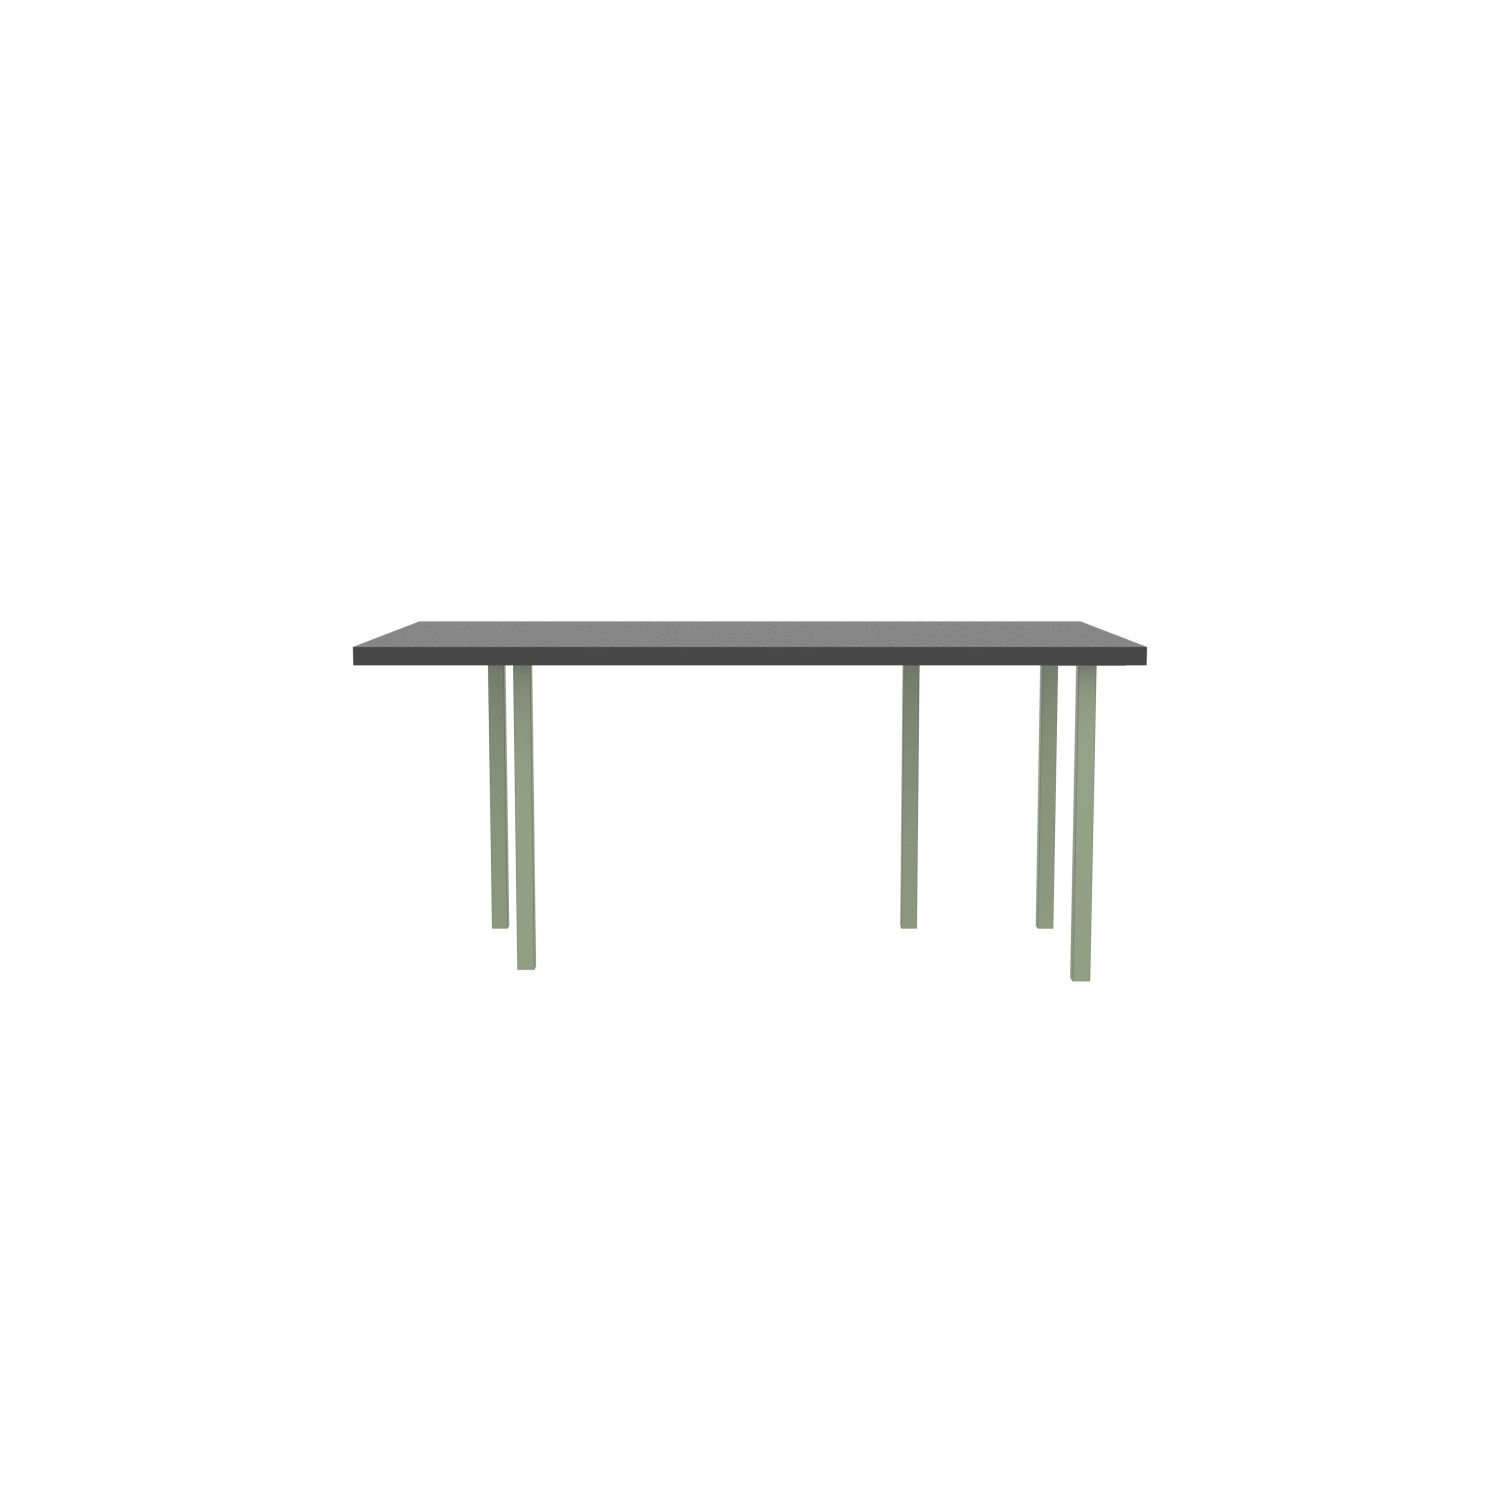 lensvelt bbrand table five fixed heigt 915x172 hpl black 50 mm price level 1 green ral6021